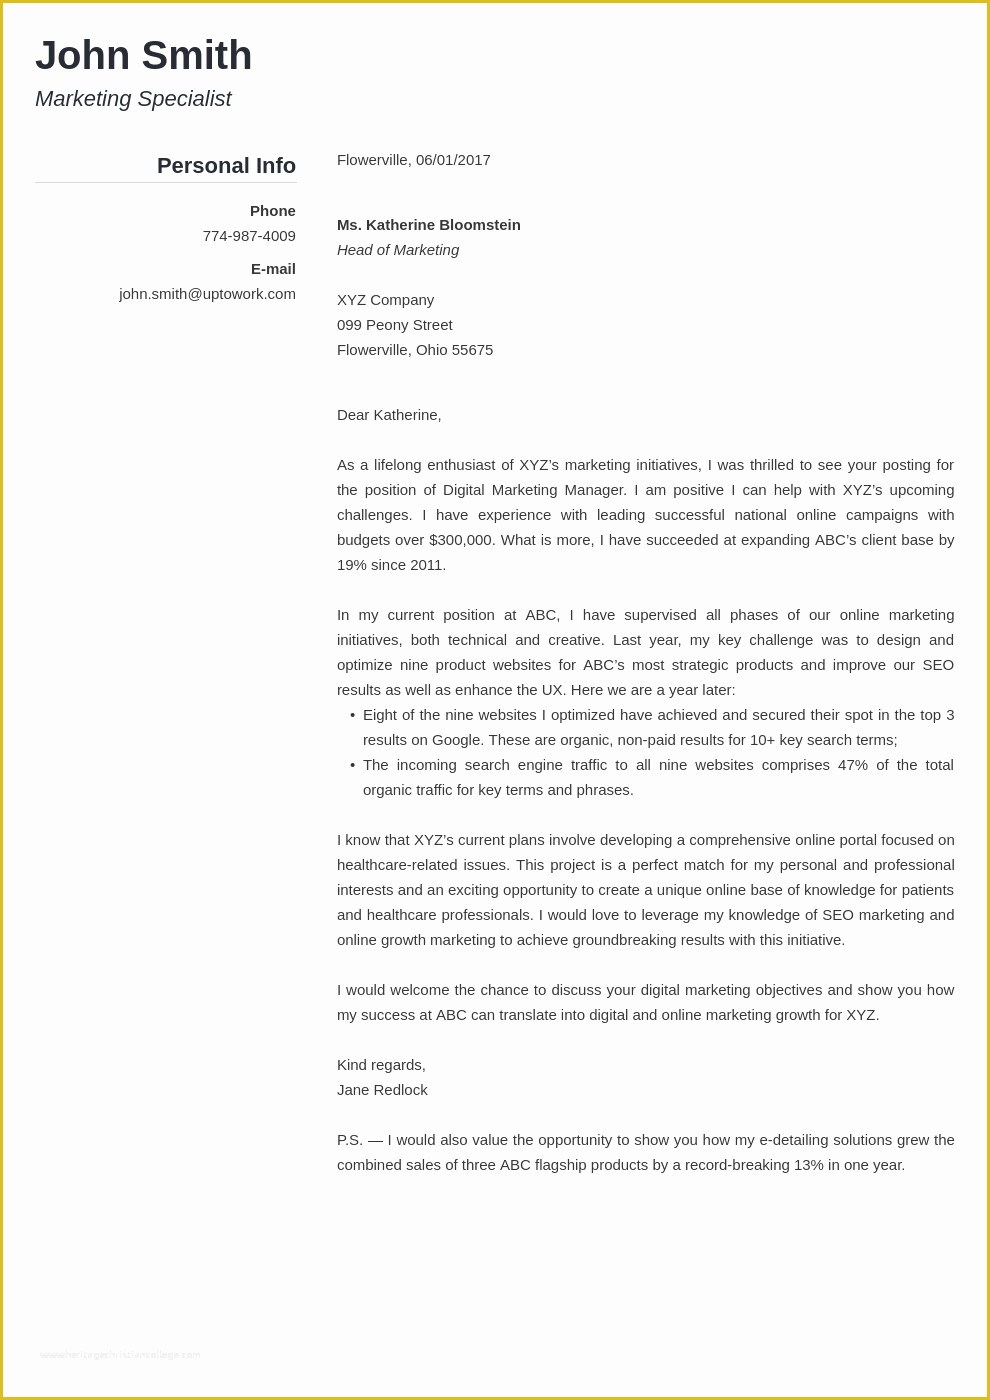 Professional Cover Letter Template Free Of 20 Cover Letter Templates Fill them In and Download In 5